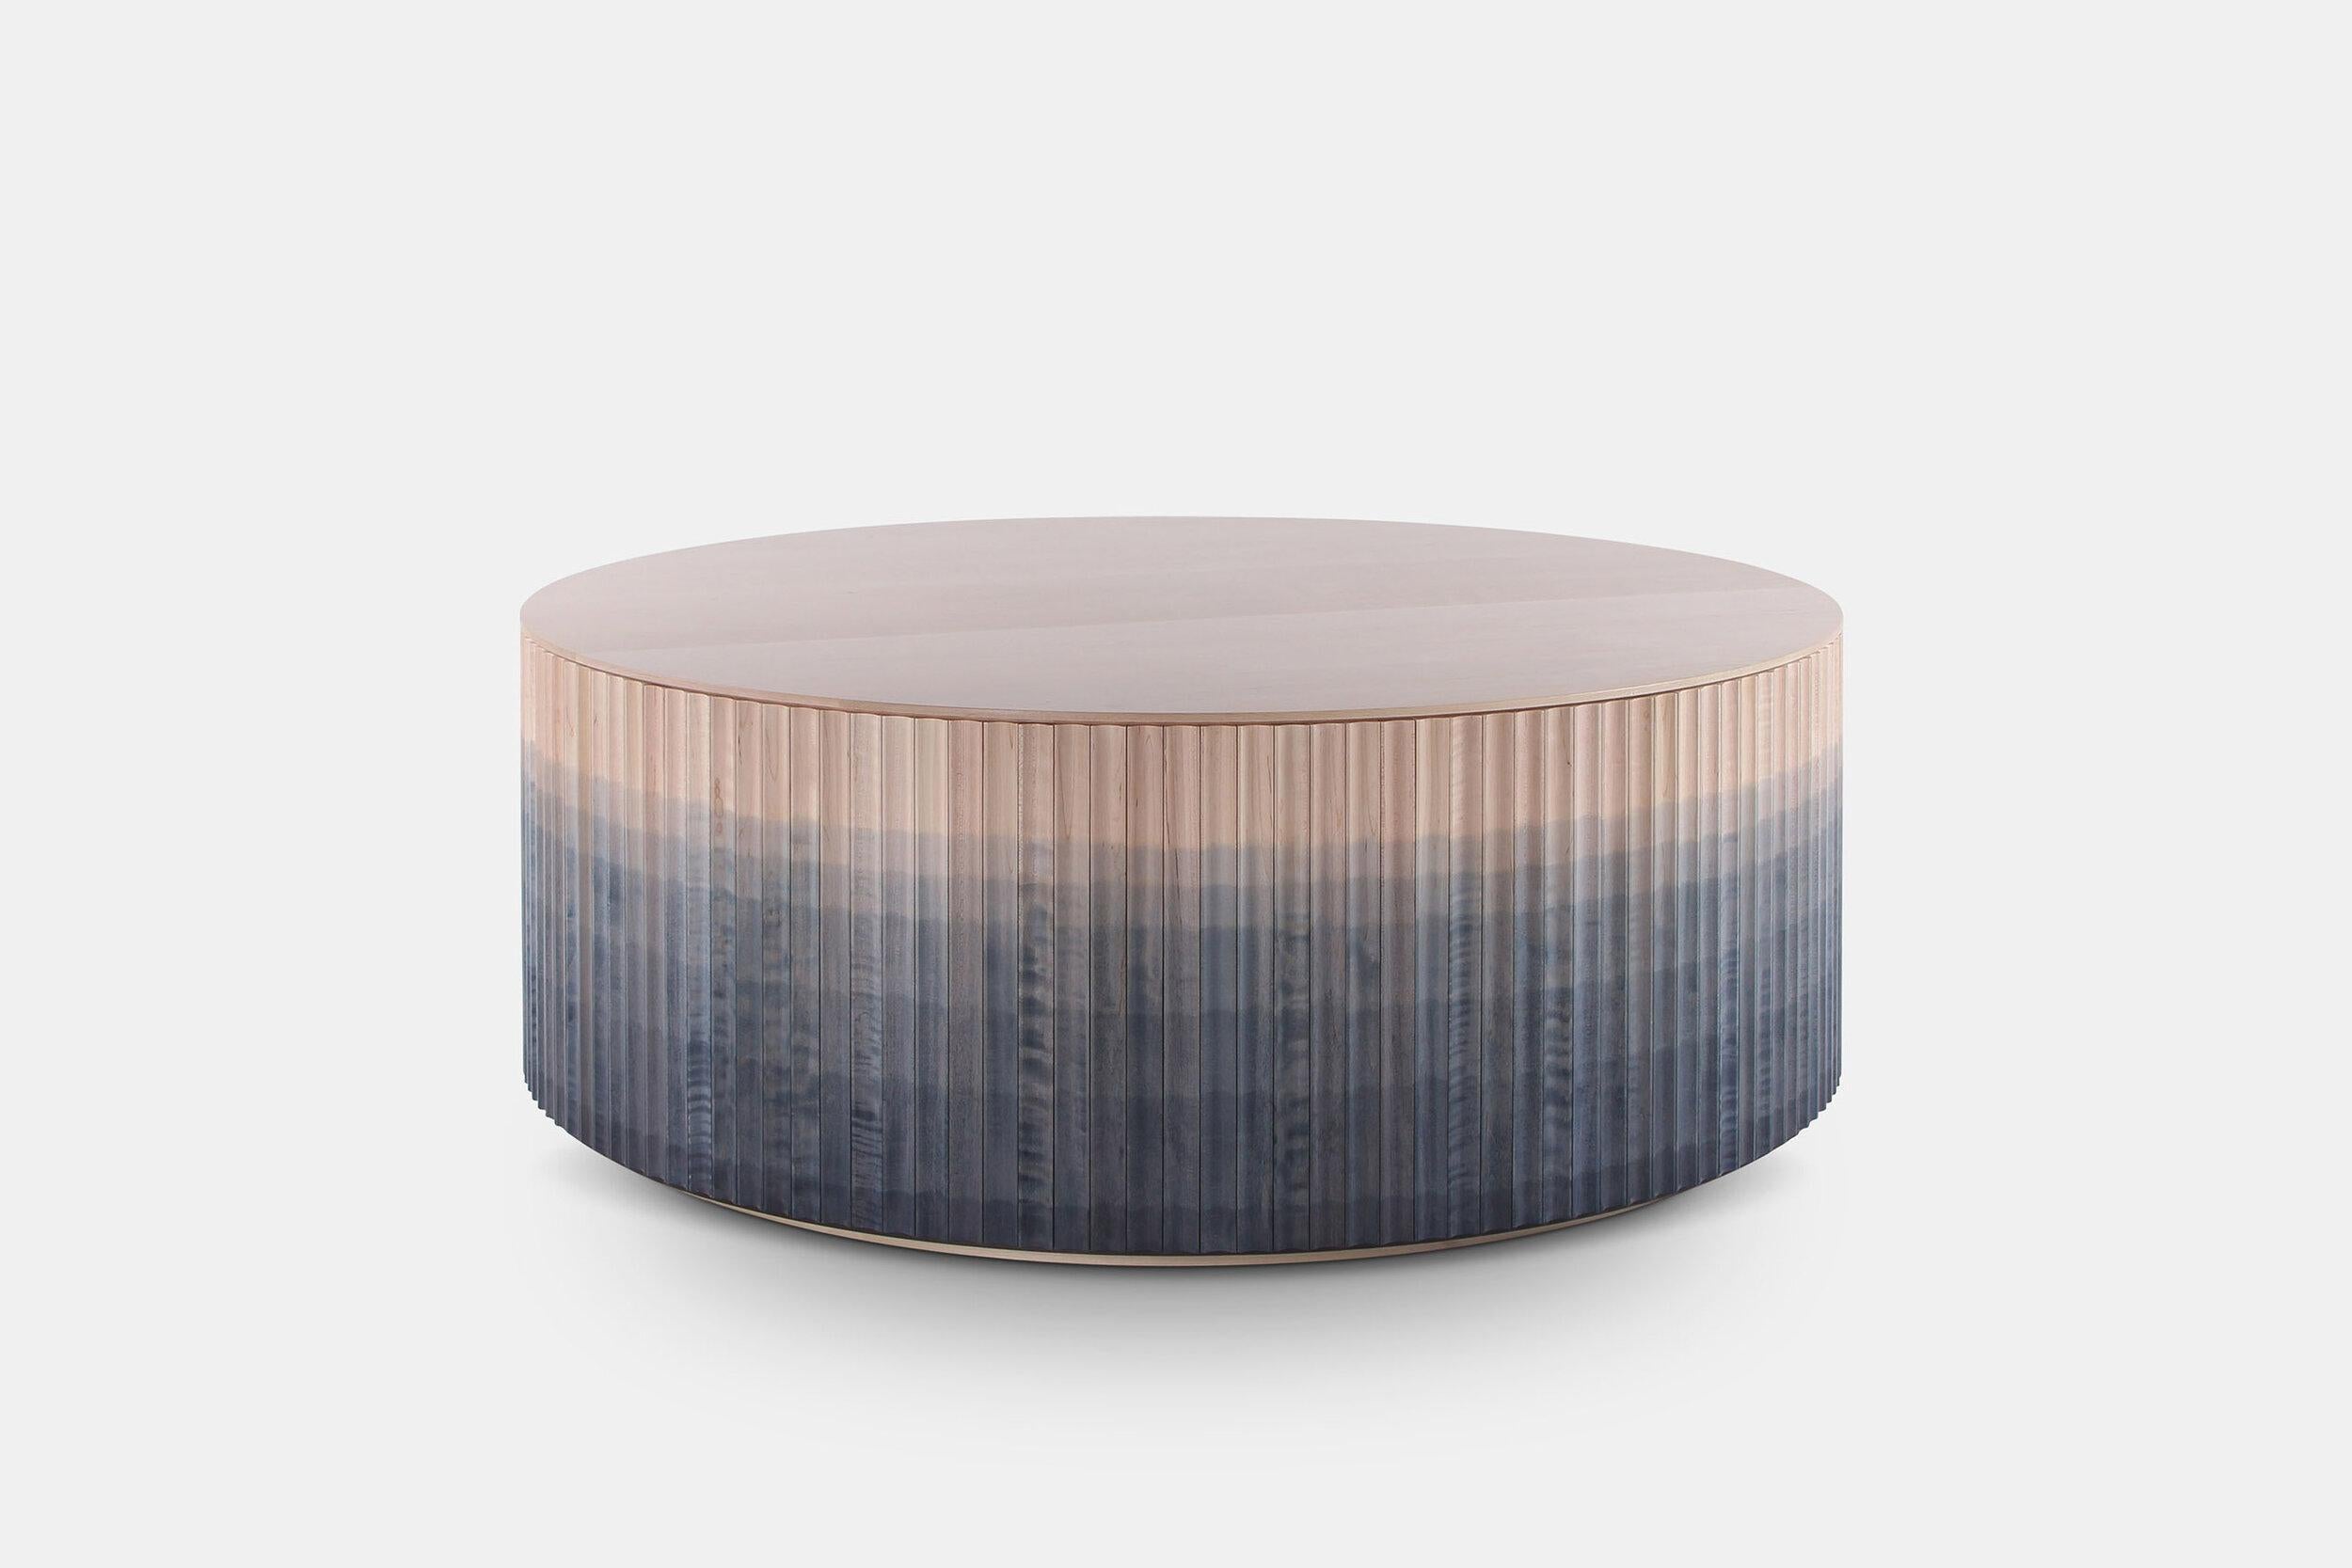 Pilar coffee table by Indo Made 
One of a kind
Dimensions: Ø99 X H38.1 cm 
Materials: Maple with ombre finish.

Also available in other materials. 
Each piece is carefully handcrafted by our team using natural materials and traditional